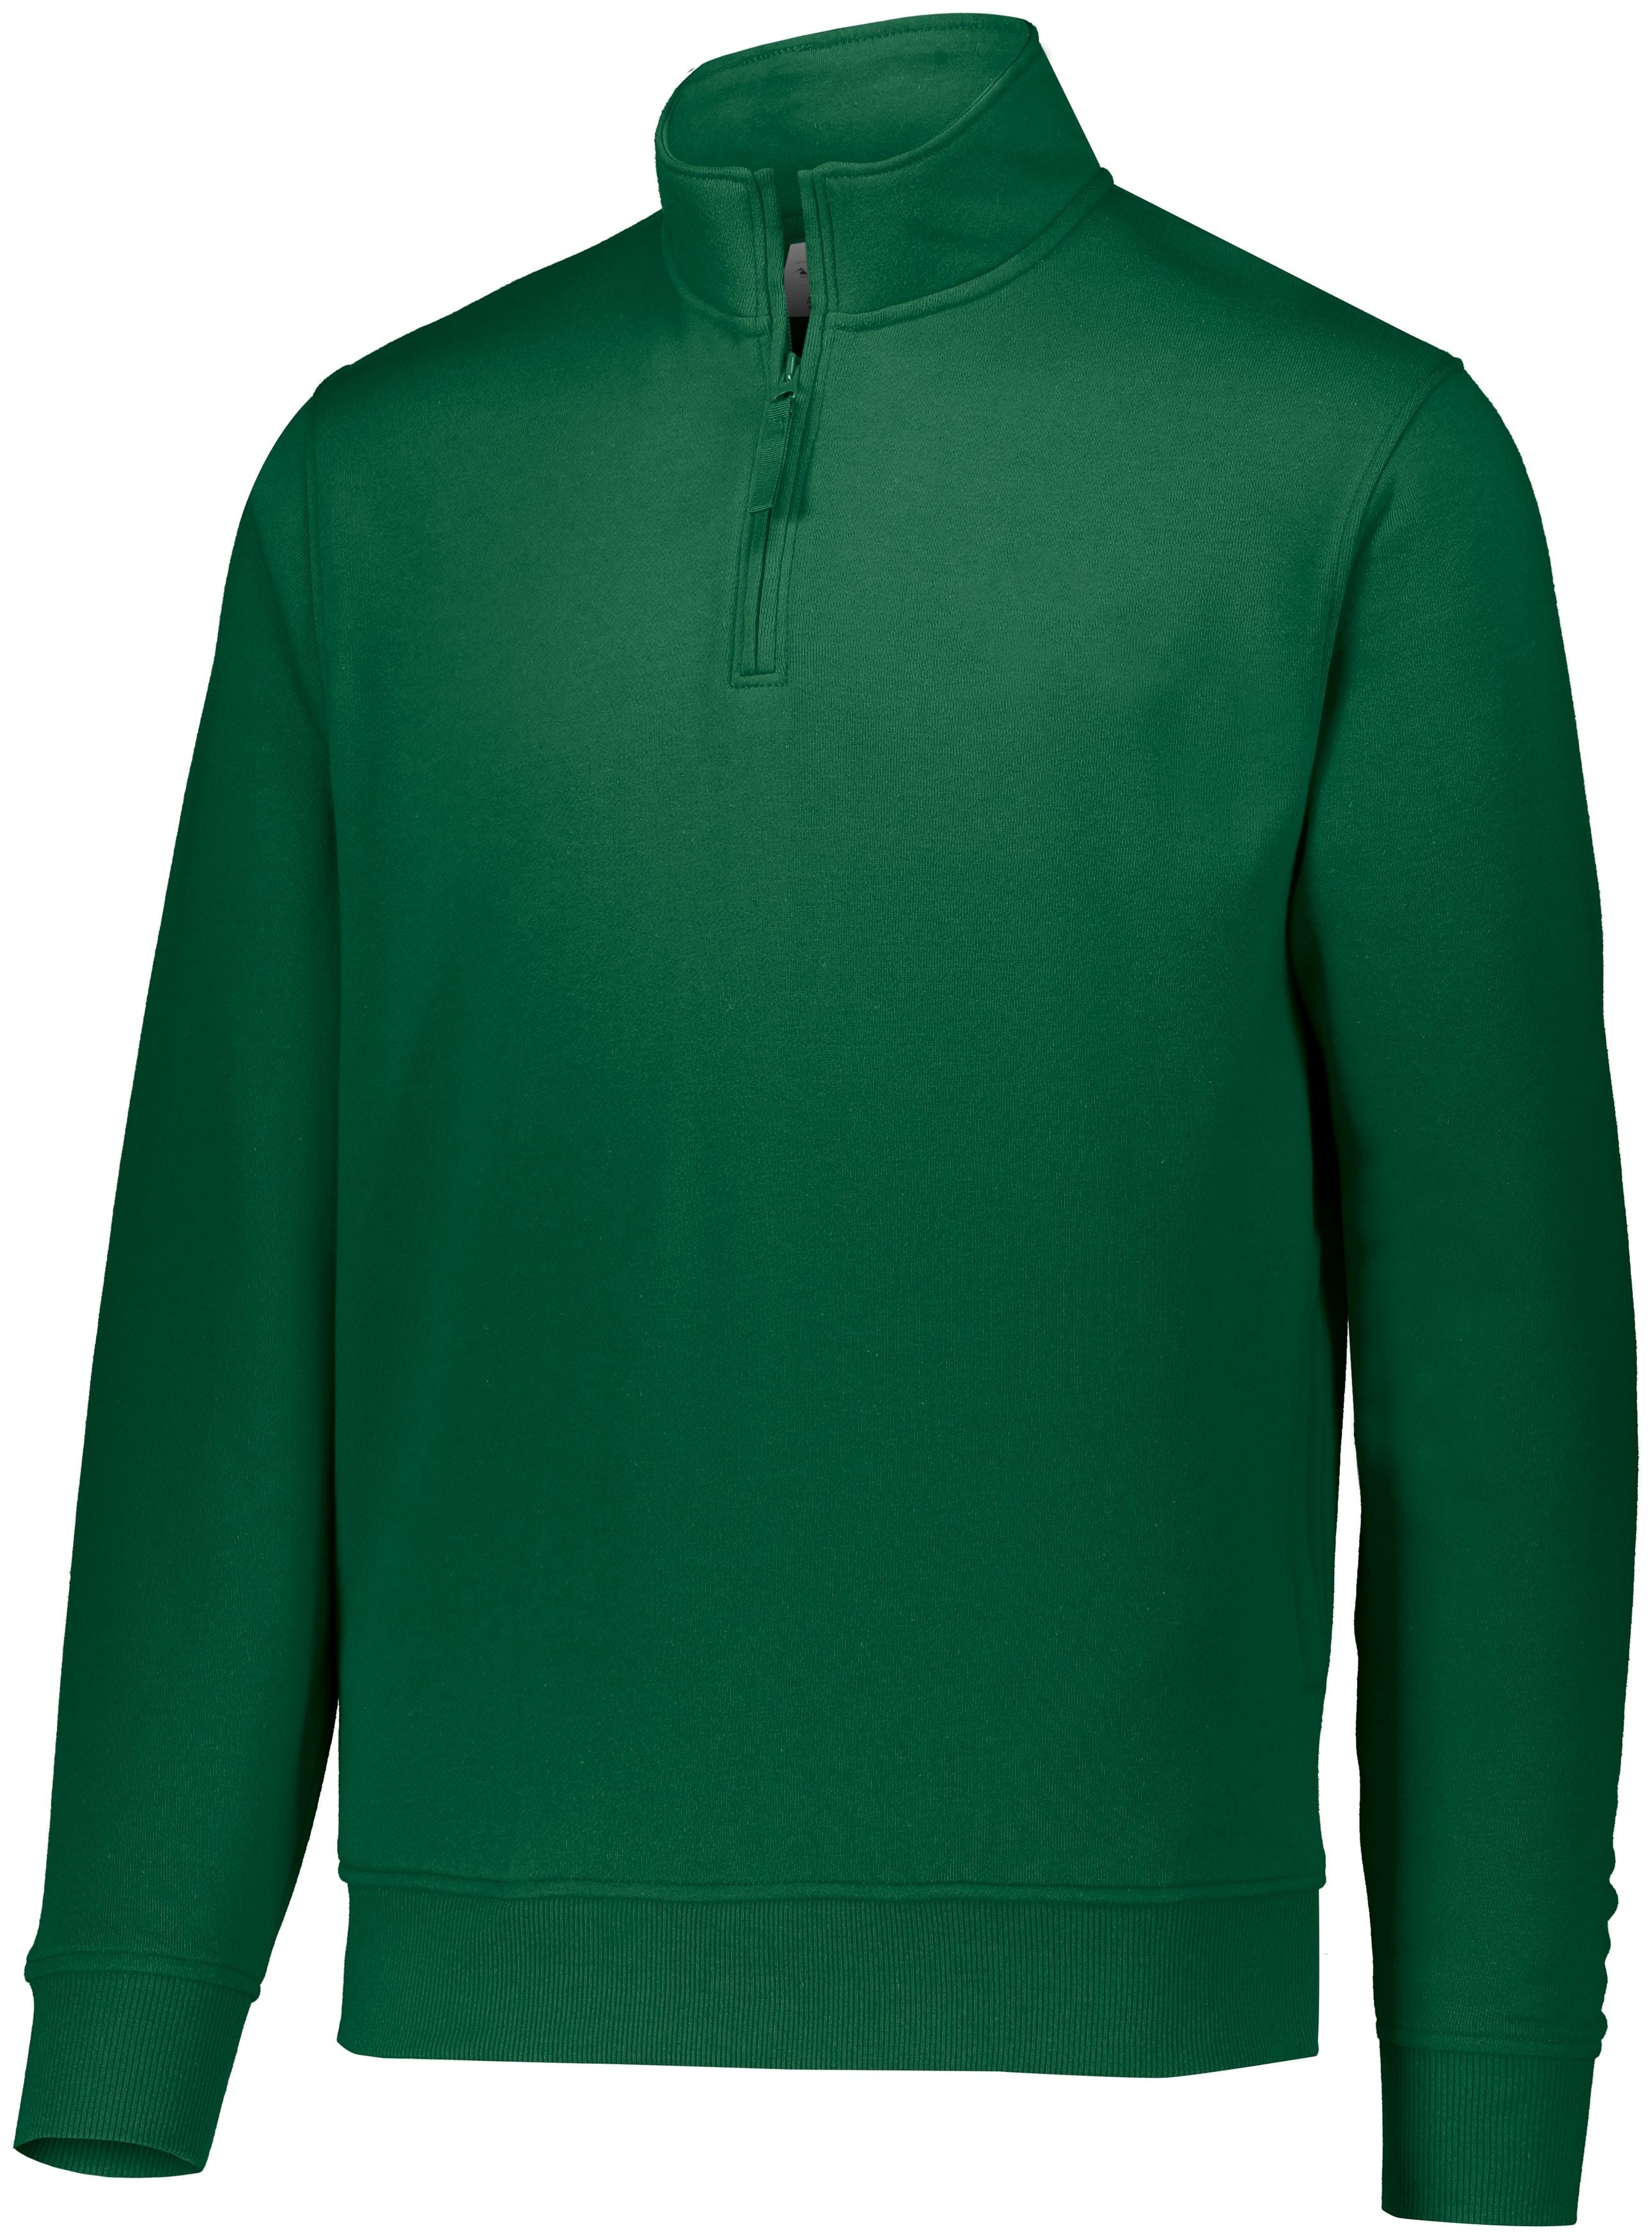 Augusta Sportswear 60/40 Fleece Pullover in Dark Green  -Part of the Adult, Adult-Pullover, Augusta-Products, Outerwear product lines at KanaleyCreations.com